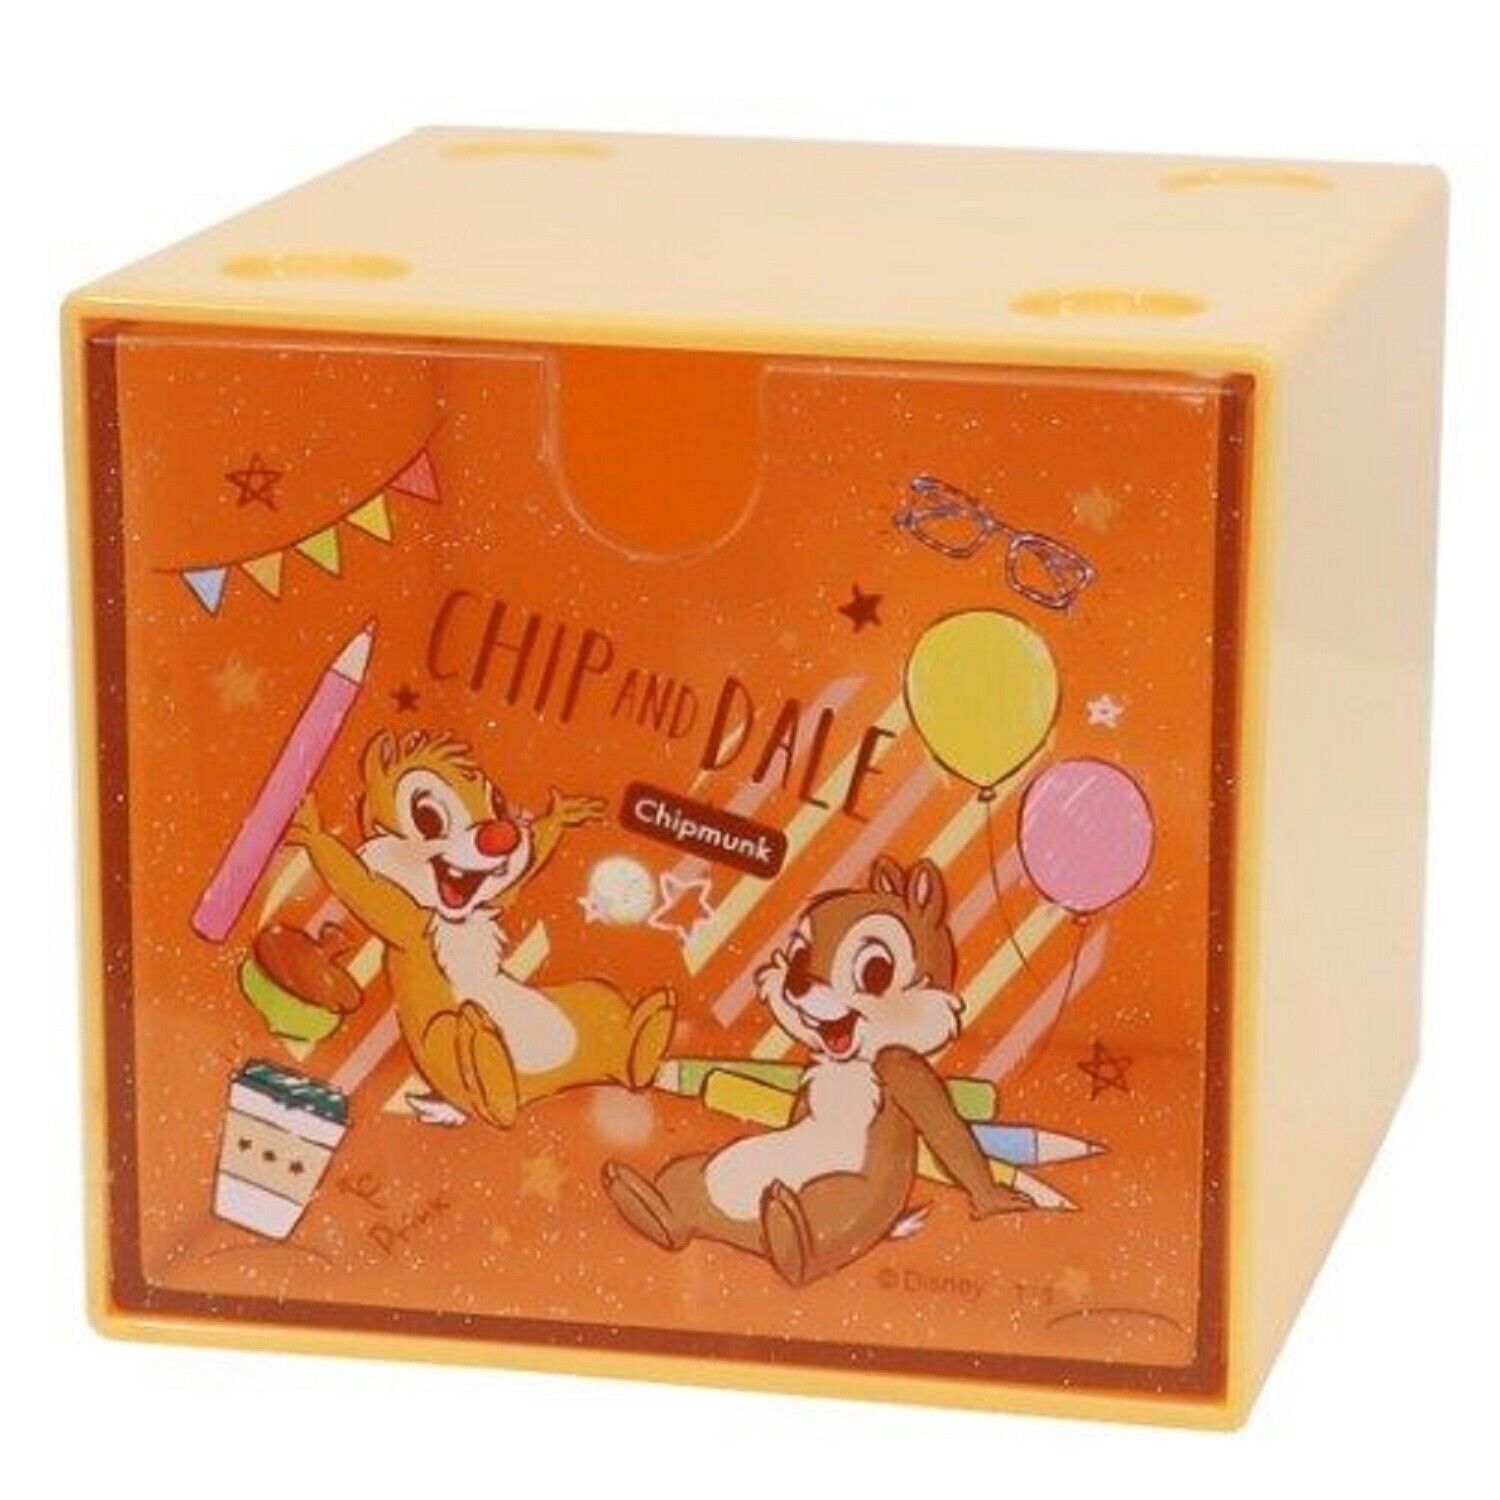 Disney Chip & Dale Stacking Mini Chest Desk Top Storage Box Japan Happiness Time